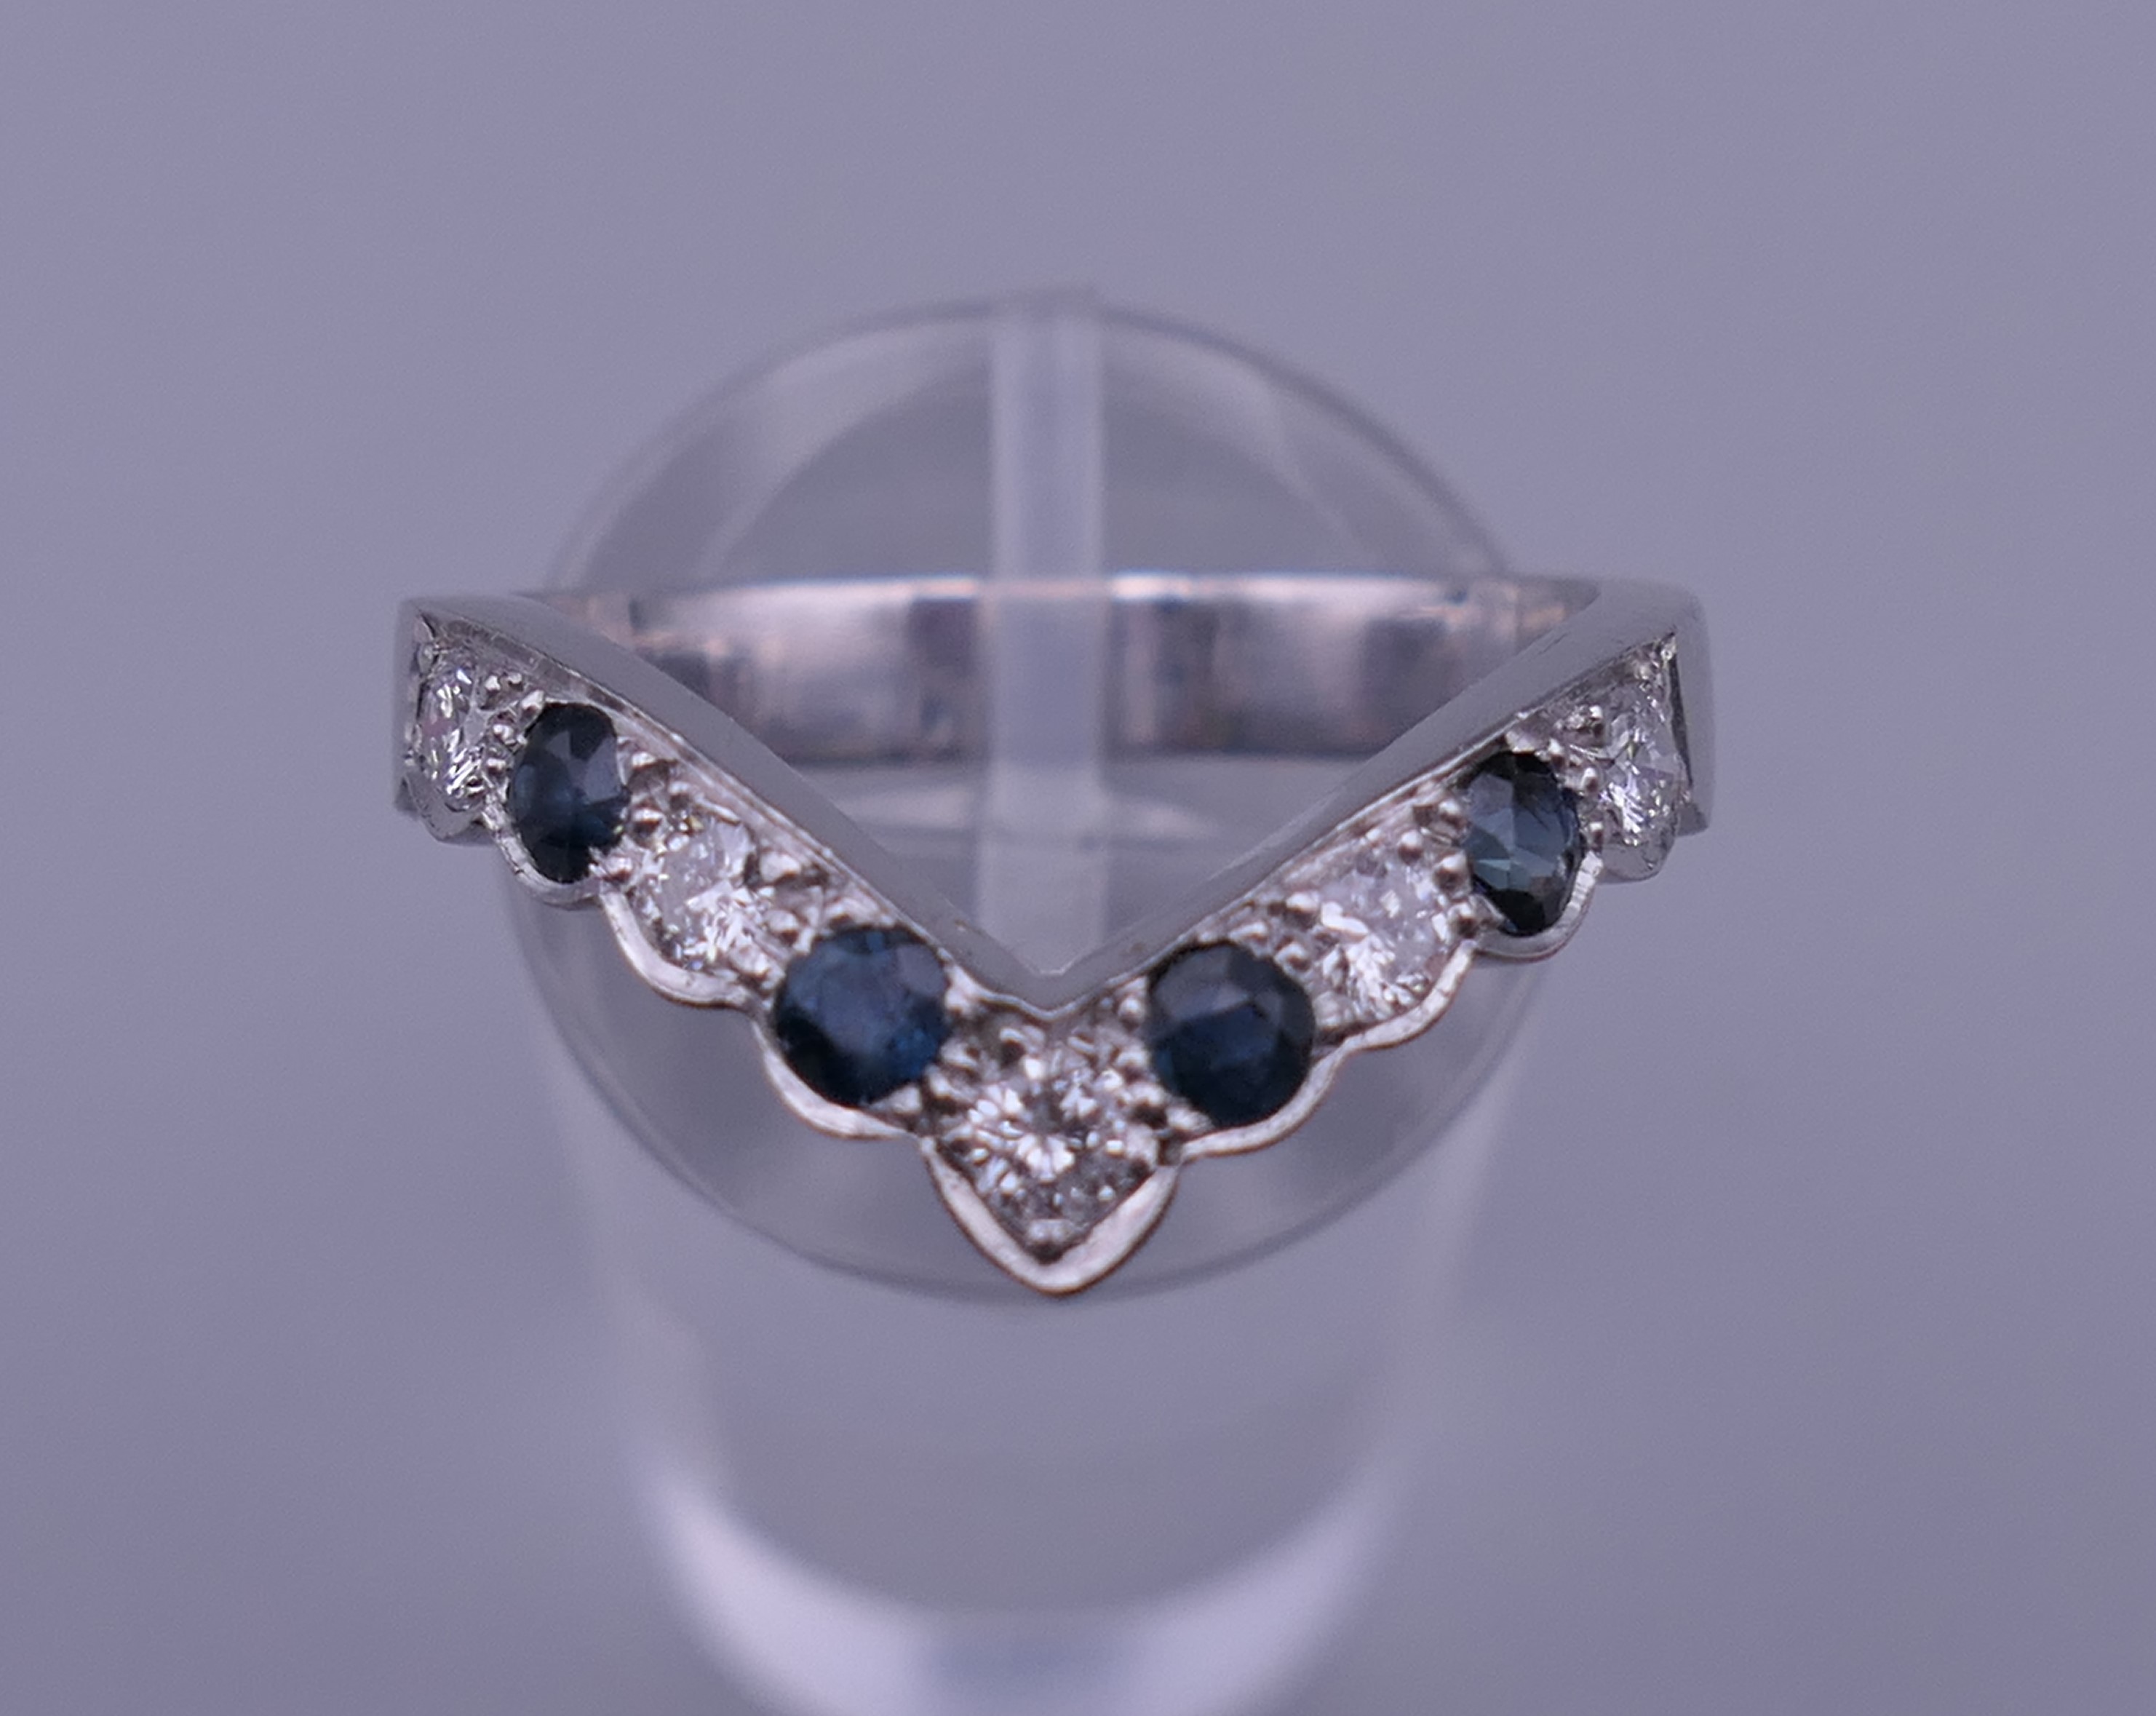 An 18 ct white gold, diamond and sapphire wishbone ring. Ring size Q. 5.7 grammes total weight.